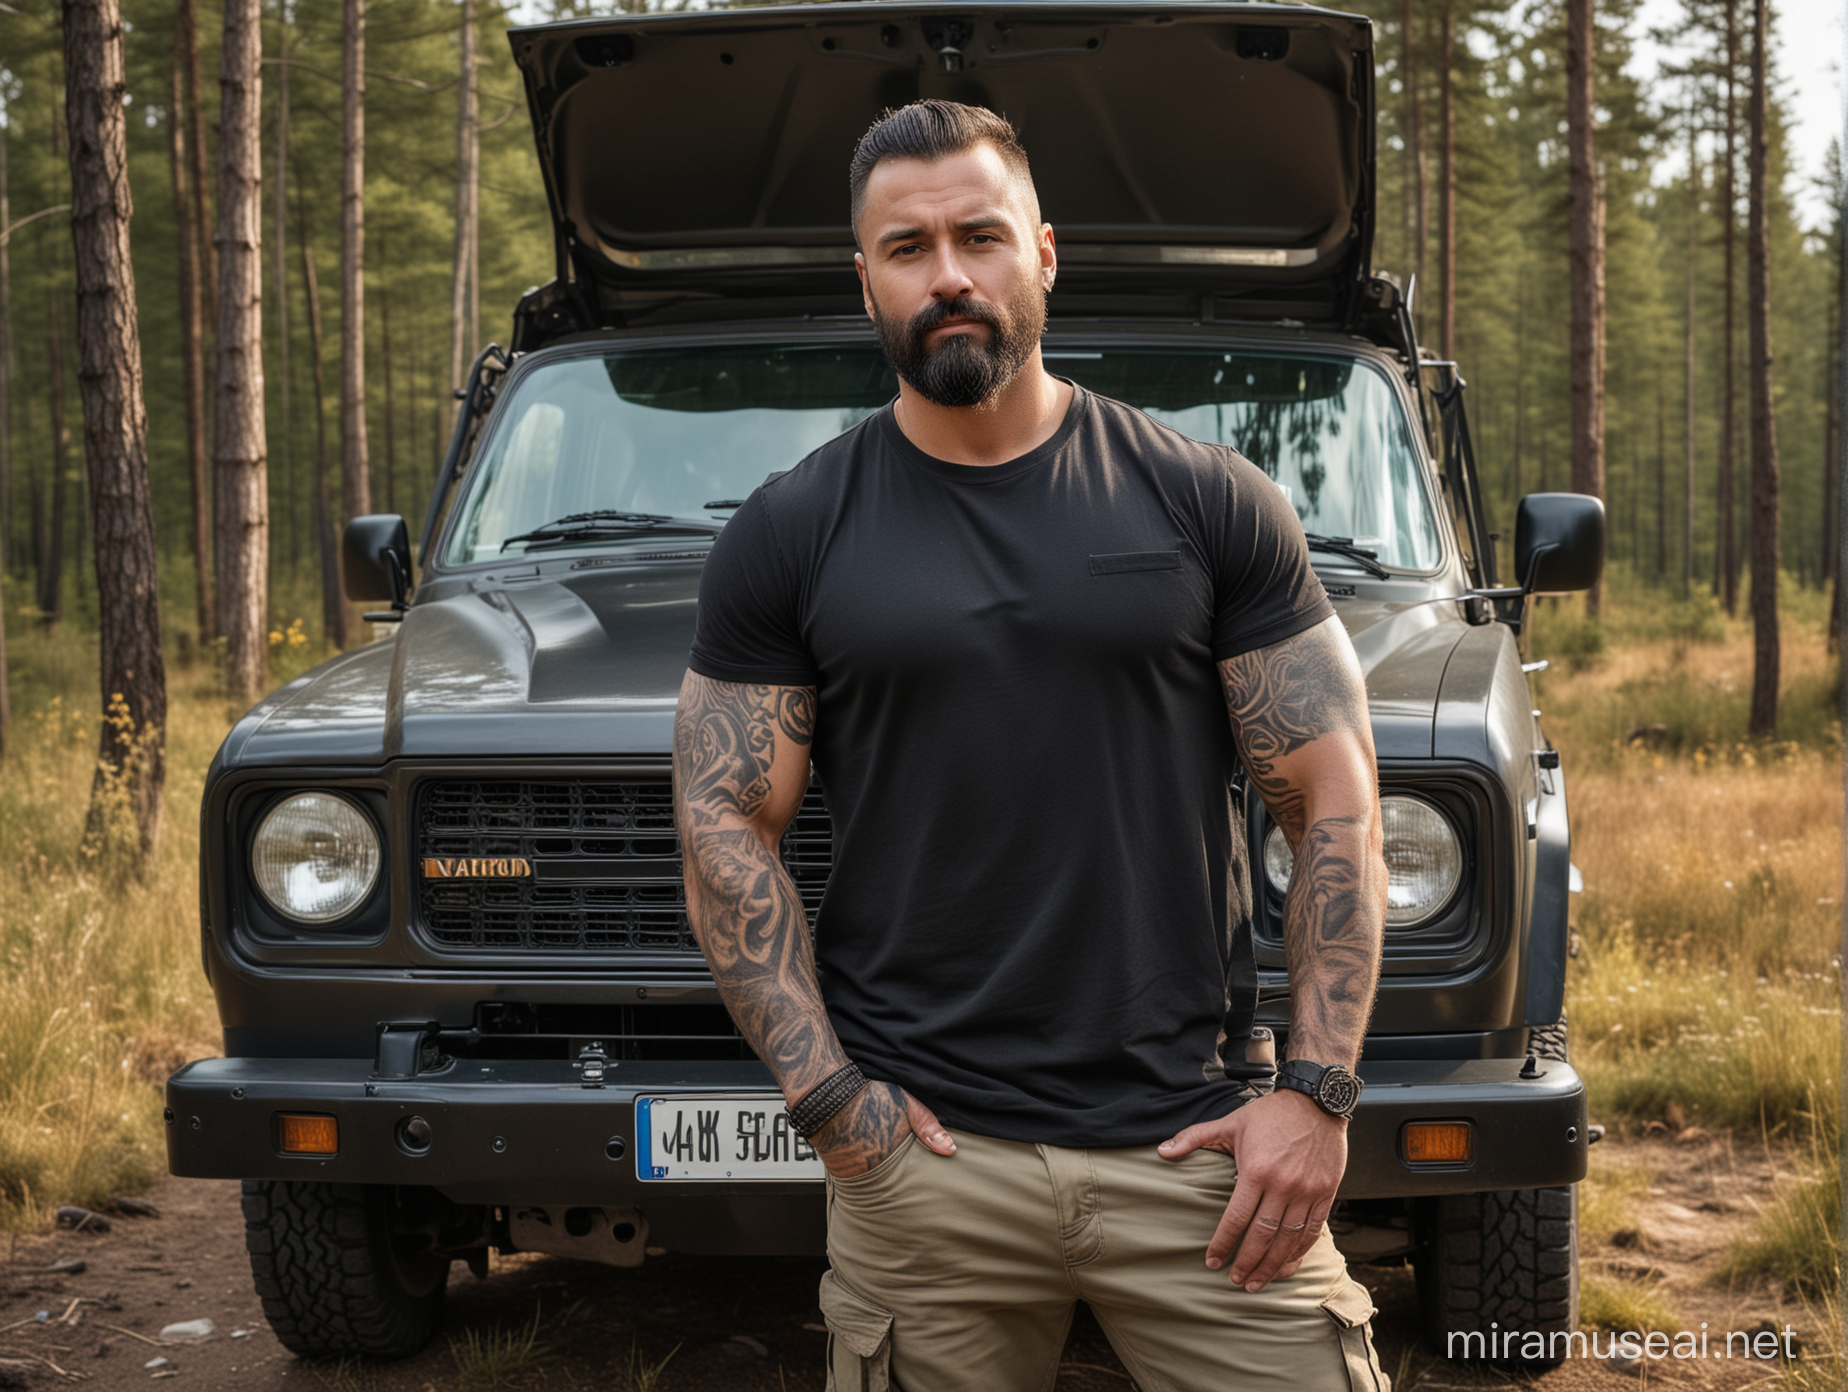 Handsome Finnish Trucker Poses in Stylish Camping Gear Amidst Wilderness